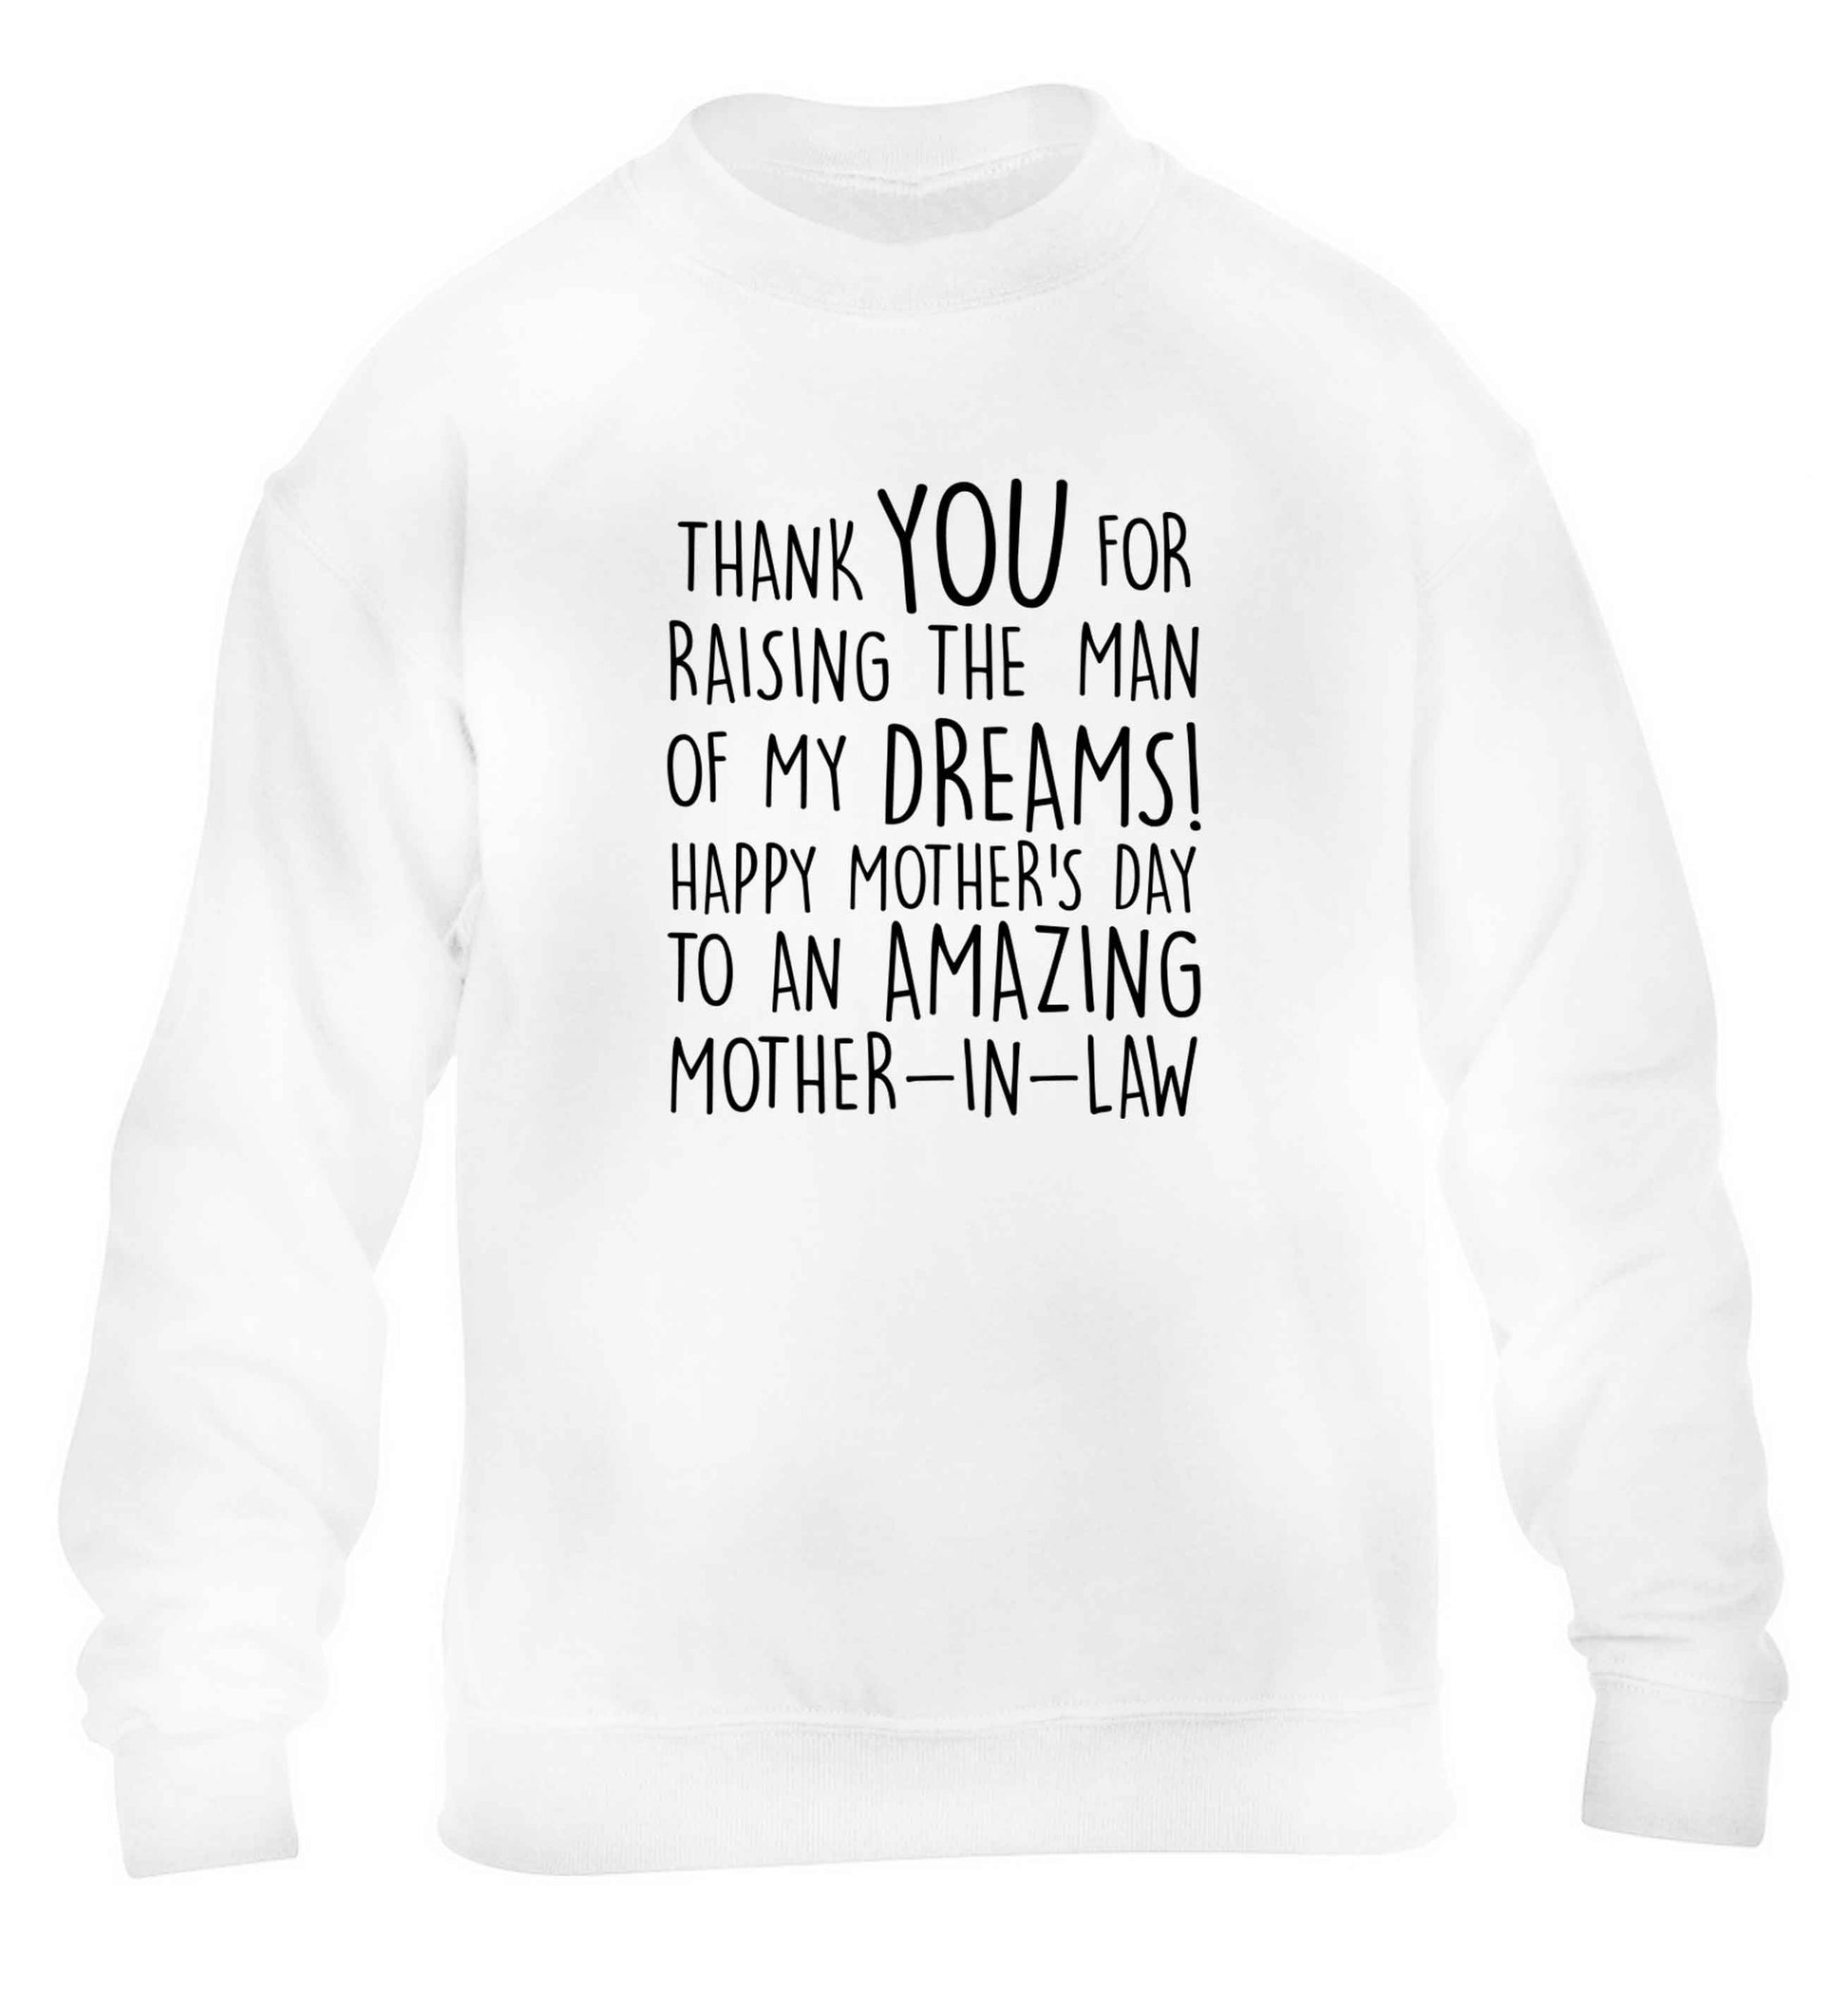 Raising the man of my dreams mother's day mother-in-law children's white sweater 12-13 Years